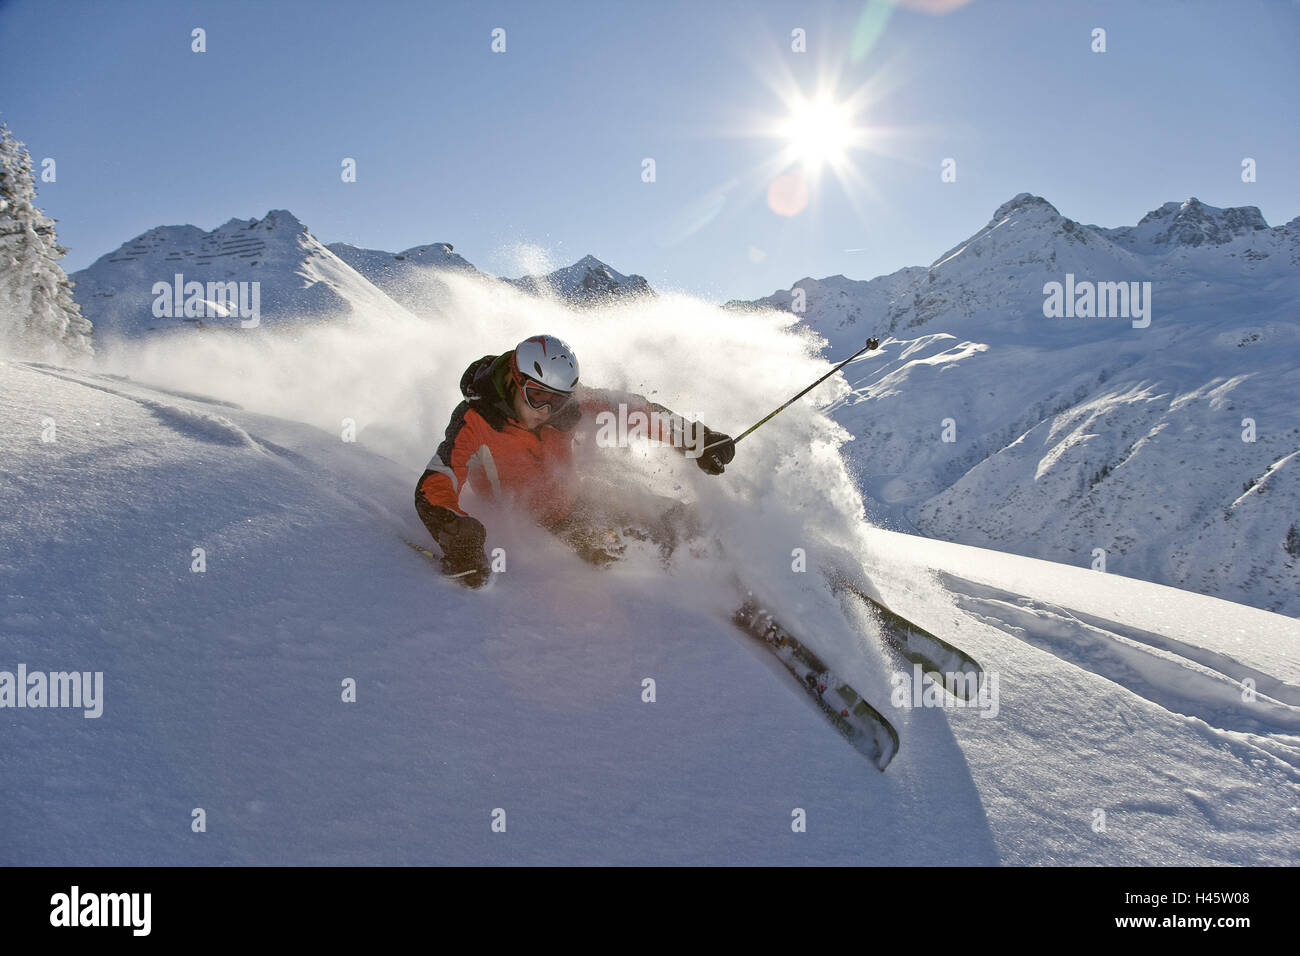 Austria, Vorarlberg, Silvretta Nova, man, young, Freeriding, skiing area, Freeride area, deep-snow-covered, snow-covered, snow, deep snow, powder snow, skiing, trend, the sun, sunrays, people, skiers, man, young, ski helmet, protection, motion, tourism, sport, winter sports, hobby, winter scenery, mountains, alps, weather, clearly, Stock Photo